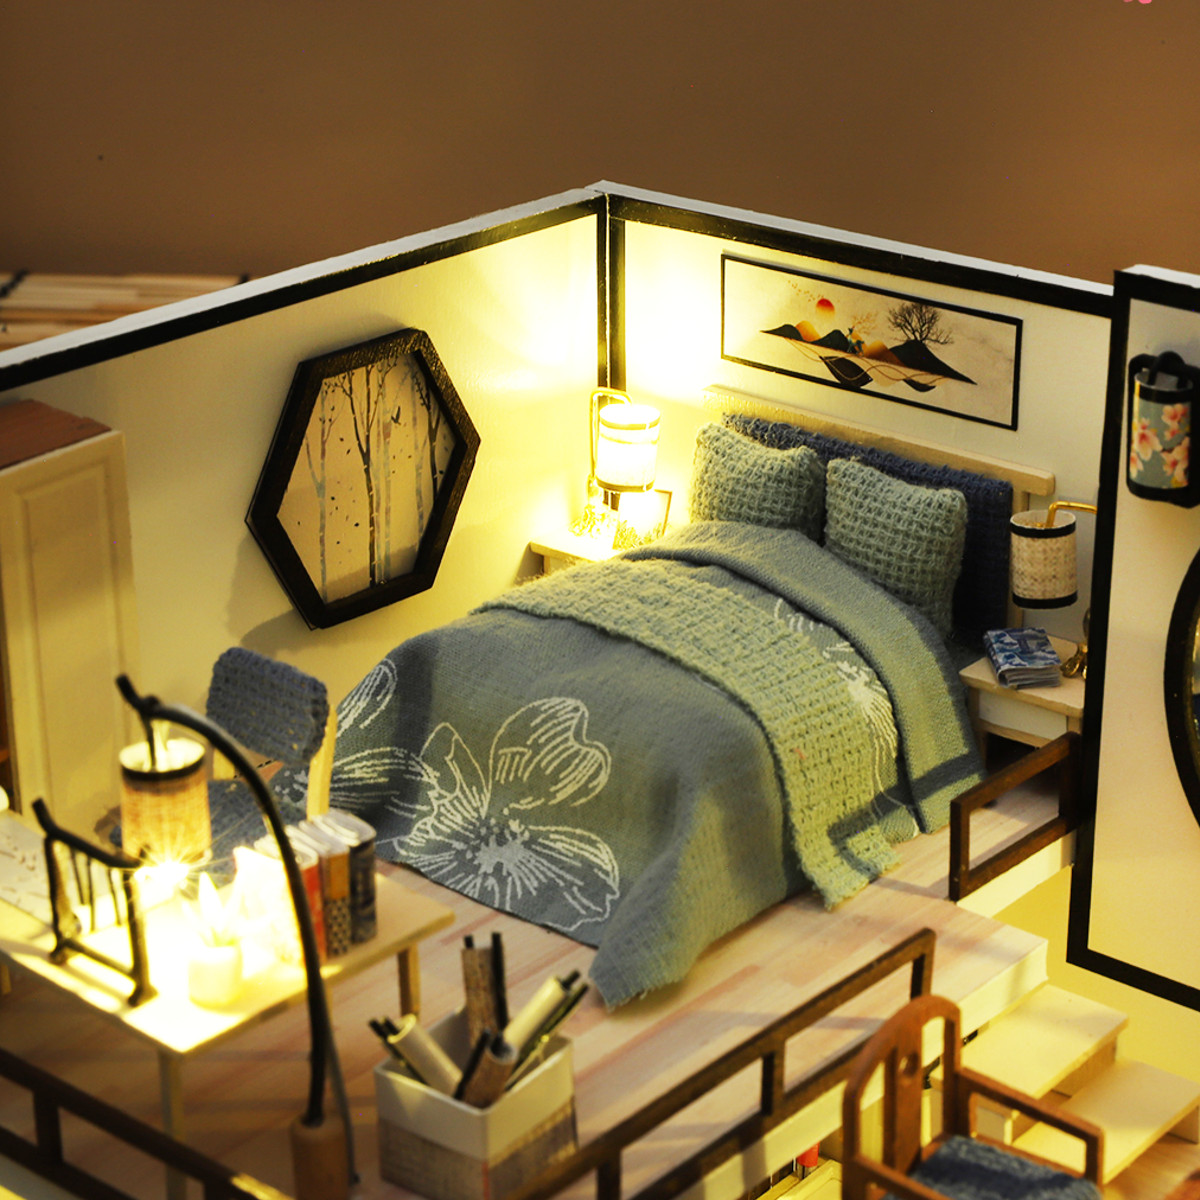 M-029-Chinese-Style-Wooden-DIY-Handmade-Assemble-Doll-House-Miniature-Furniture-Kit-with-LED-Effect--1838455-10